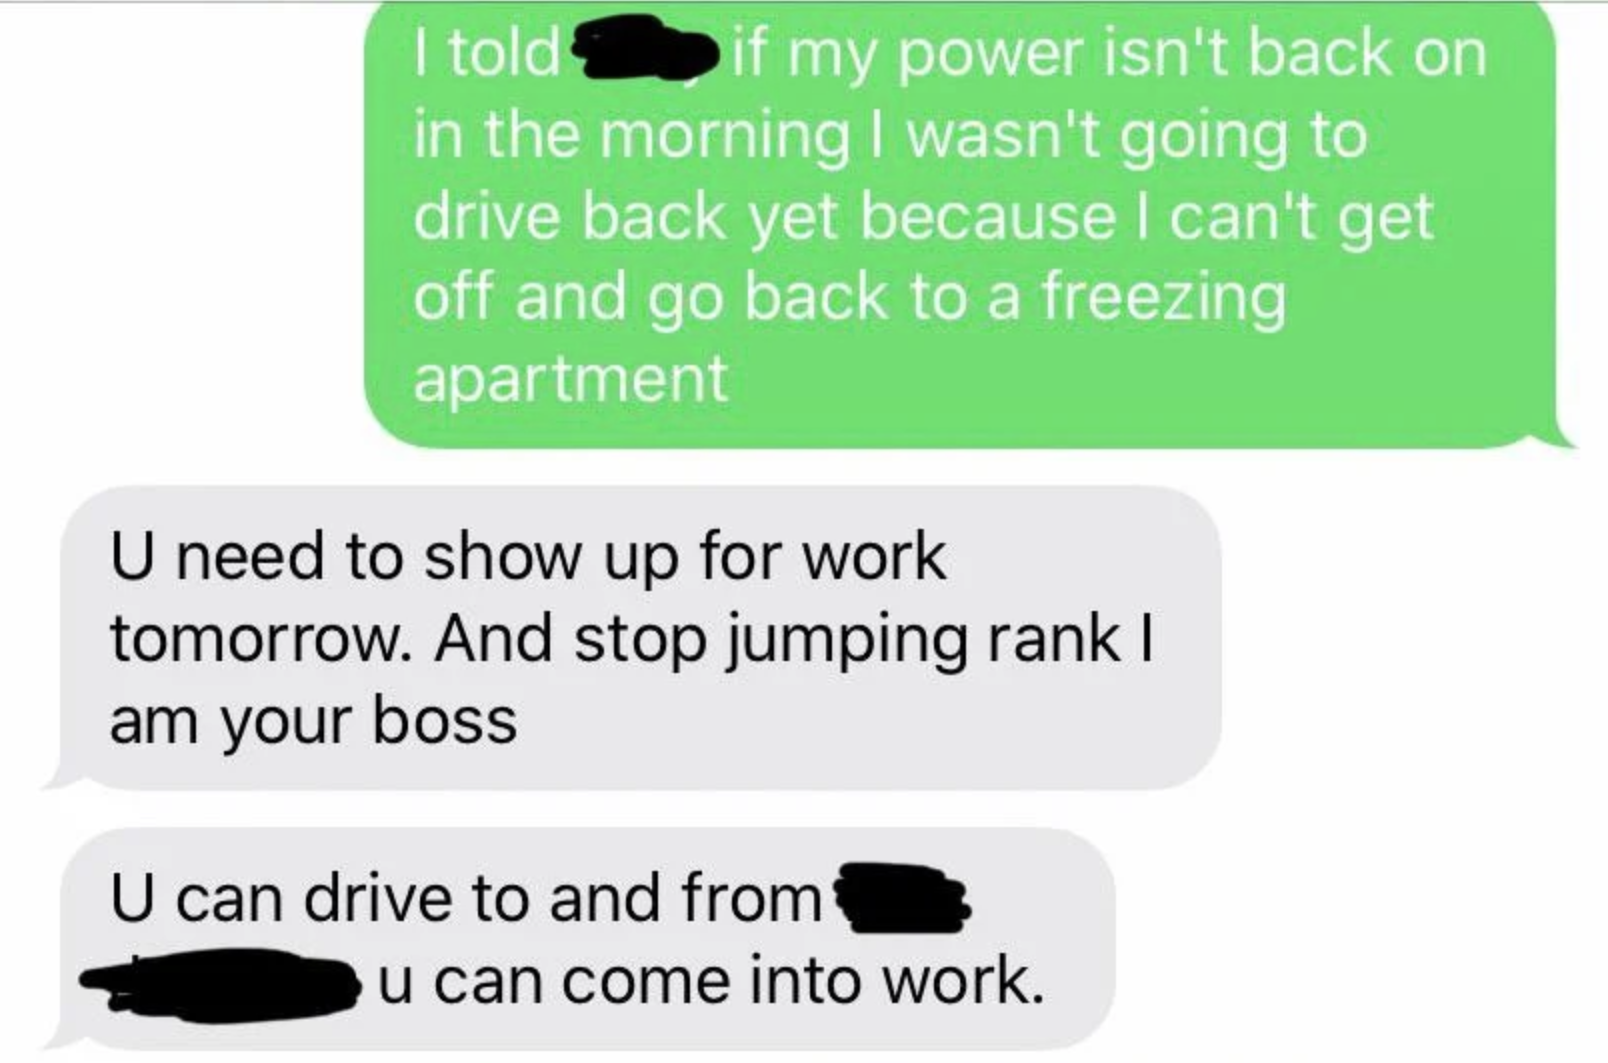 communication - I told if my power isn't back on in the morning I wasn't going to drive back yet because I can't get off and go back to a freezing apartment U need to show up for work tomorrow. And stop jumping ranki am your boss U can drive to and from u